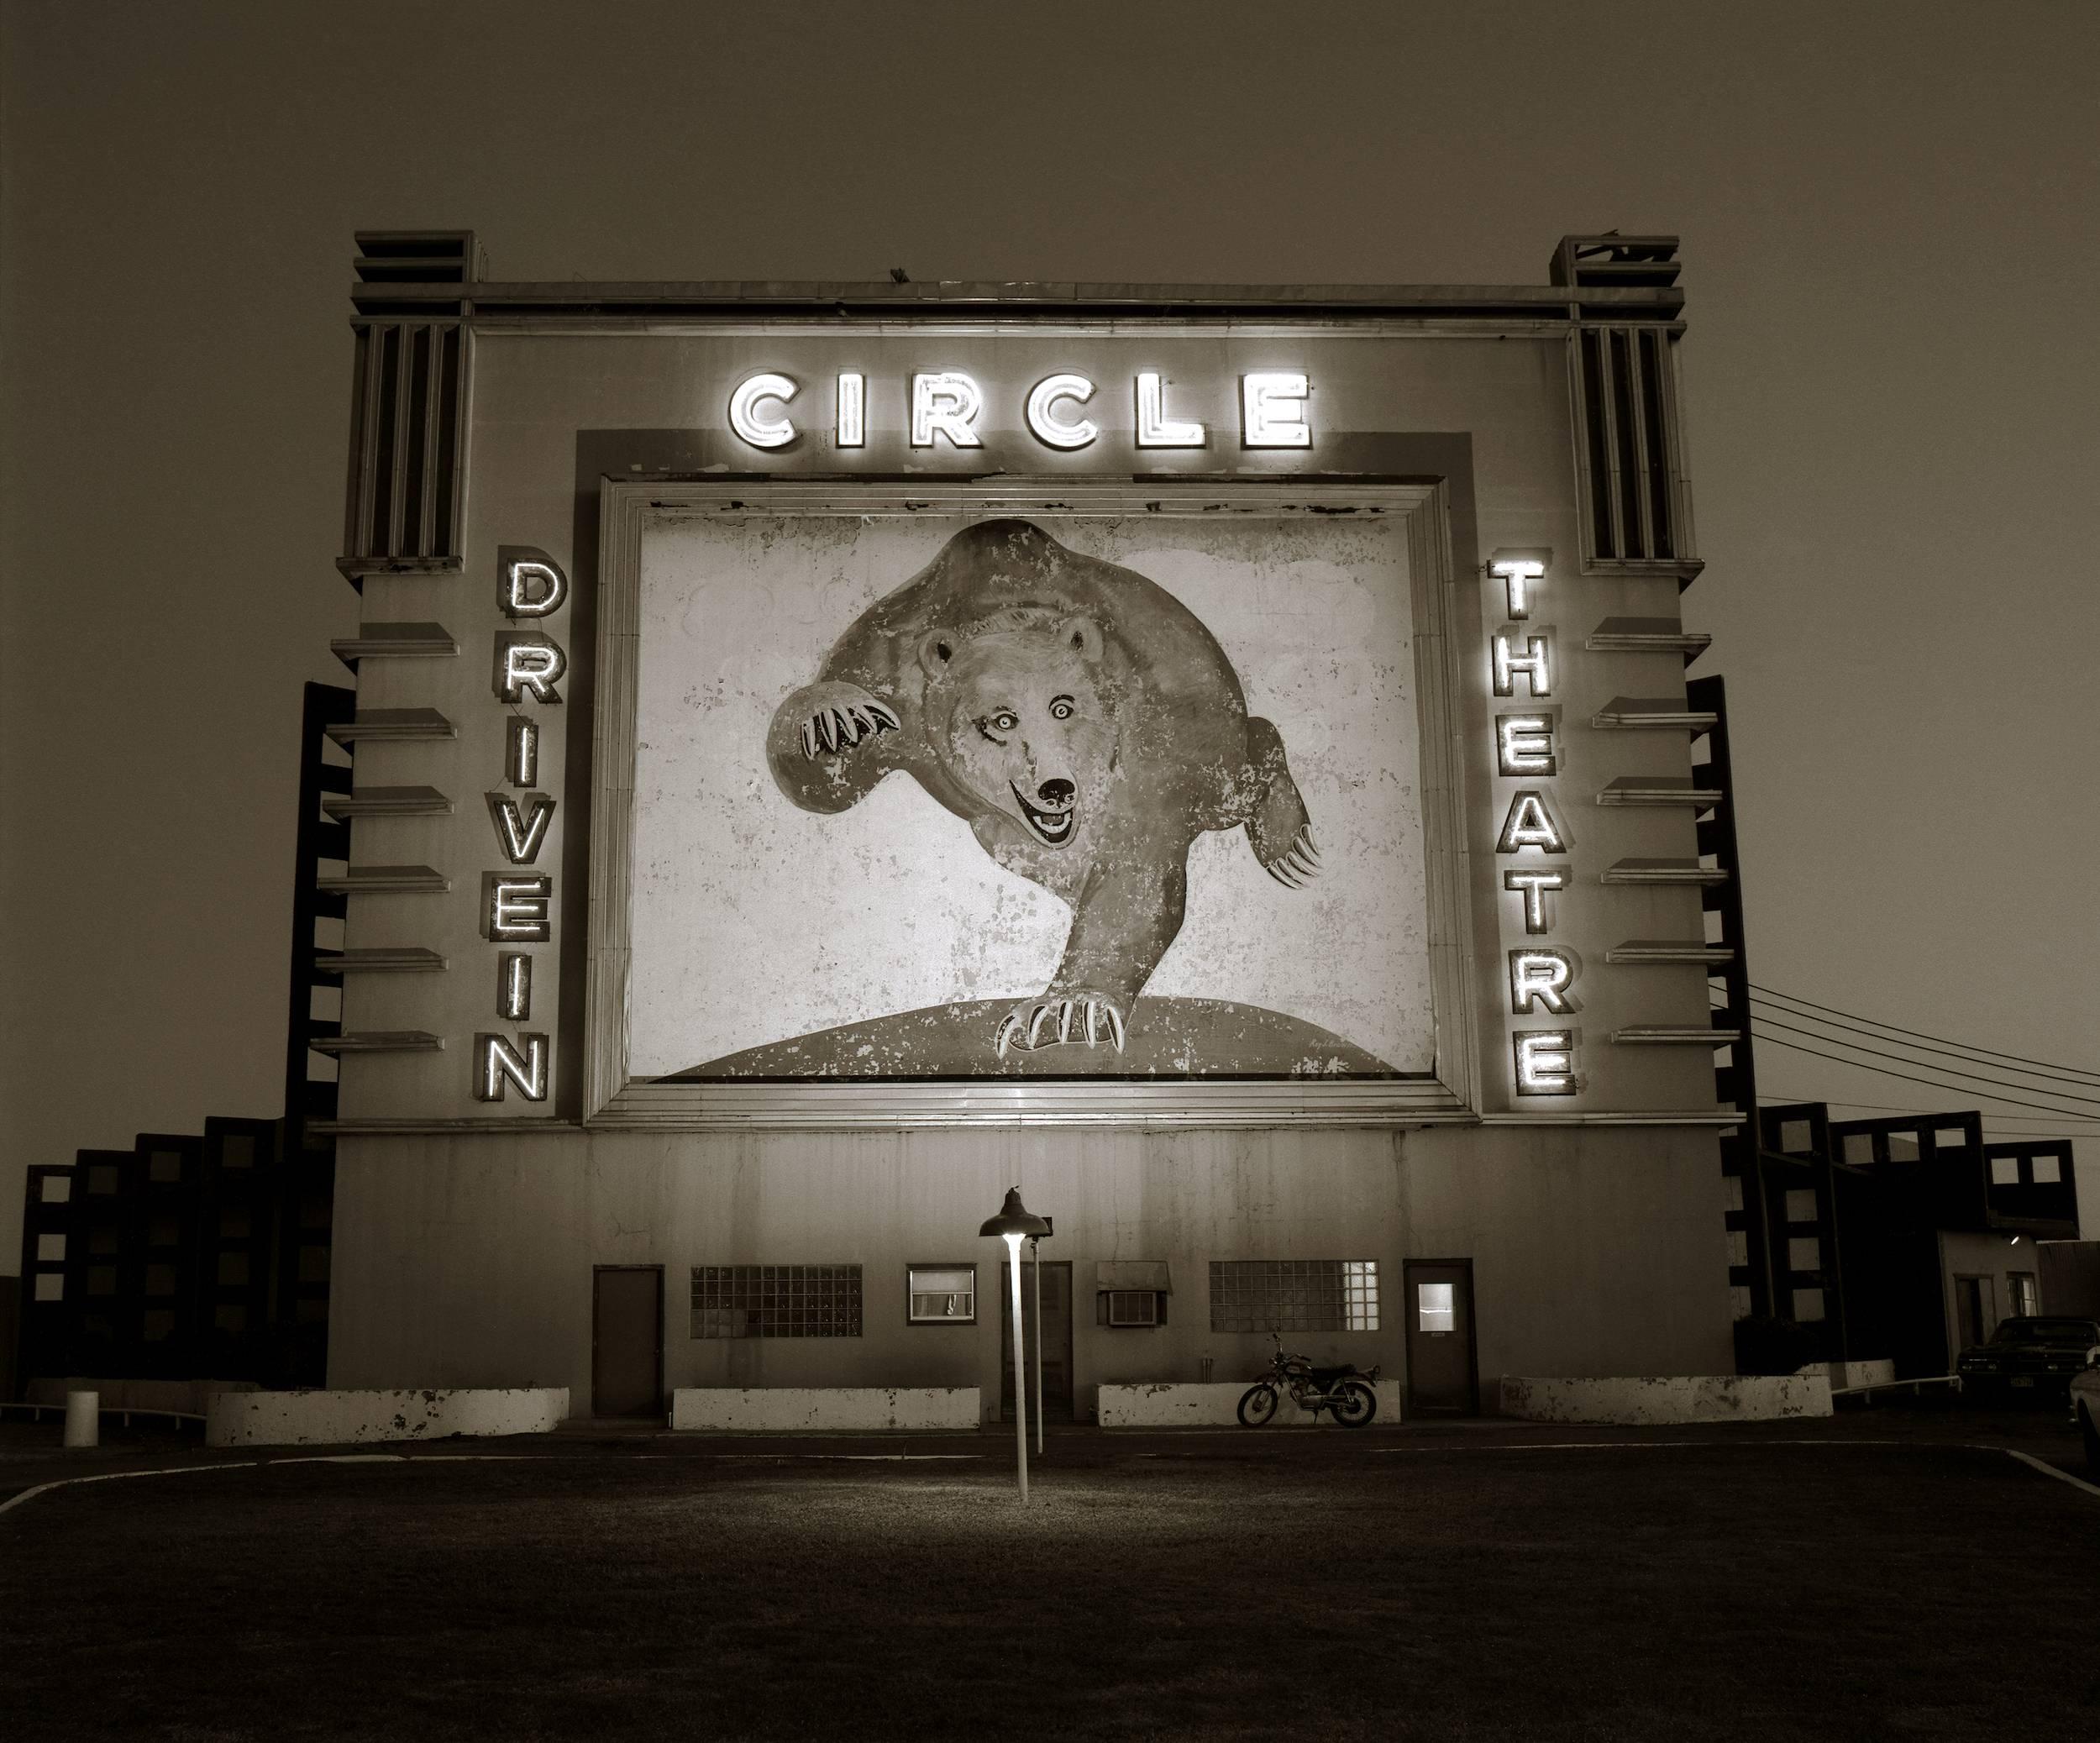 Steve Fitch Landscape Photograph - Circle Drive-In, Waco, Texas